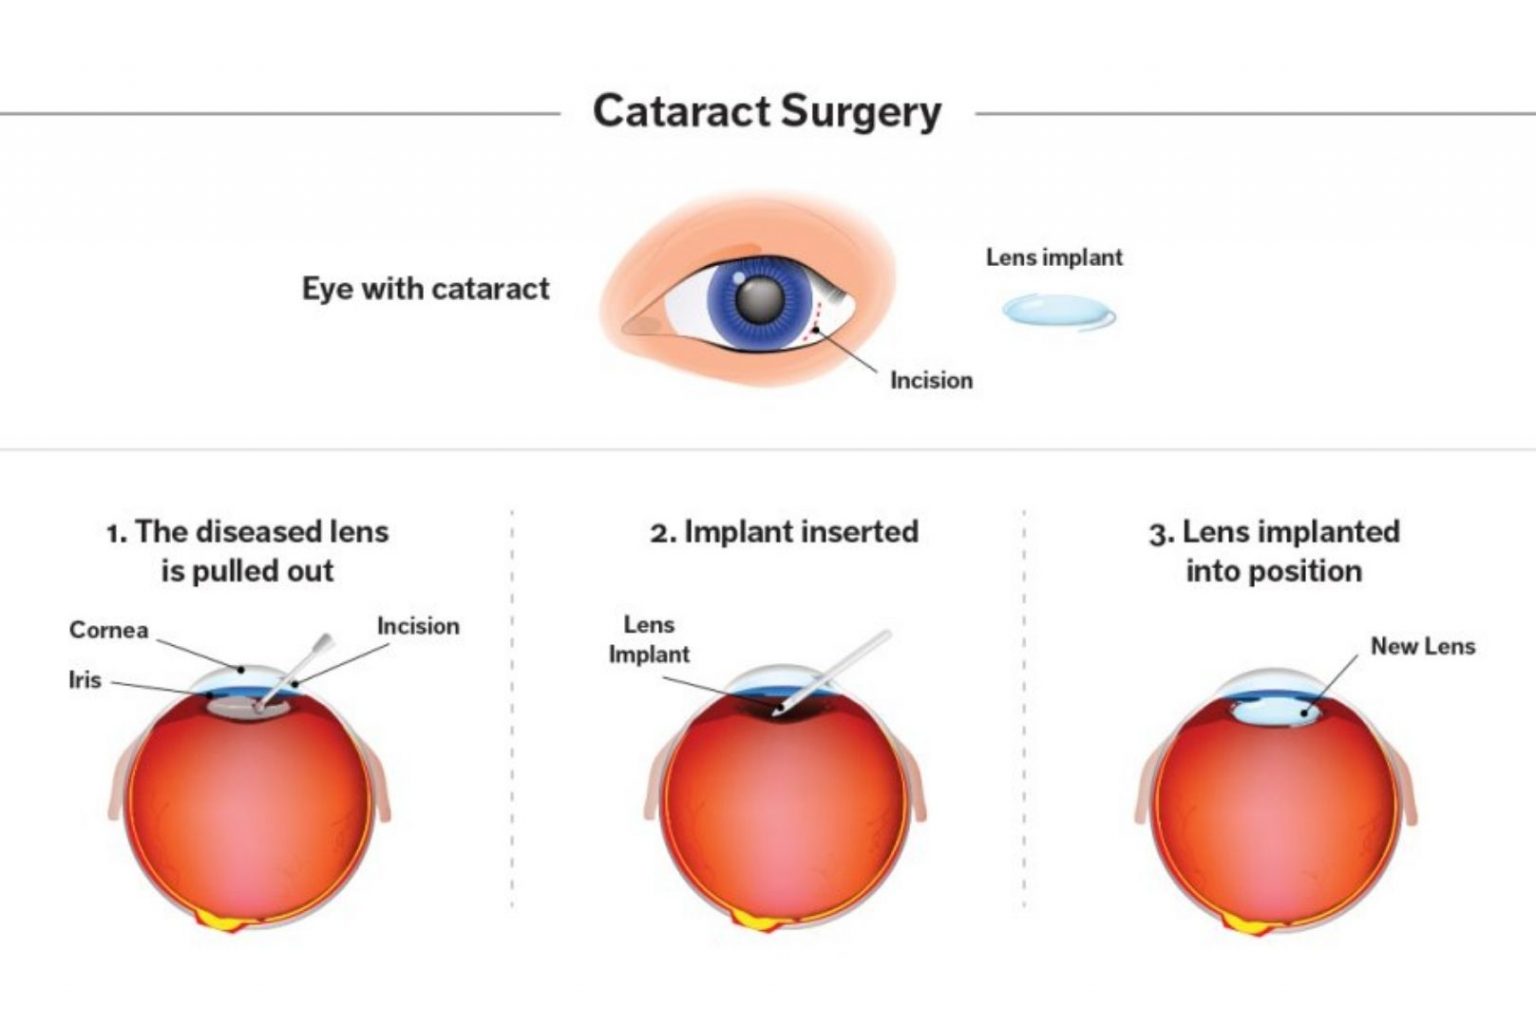 EVERYTHING YOU NEED TO KNOW ABOUT CATARACT! OPHTHALMOLOGY